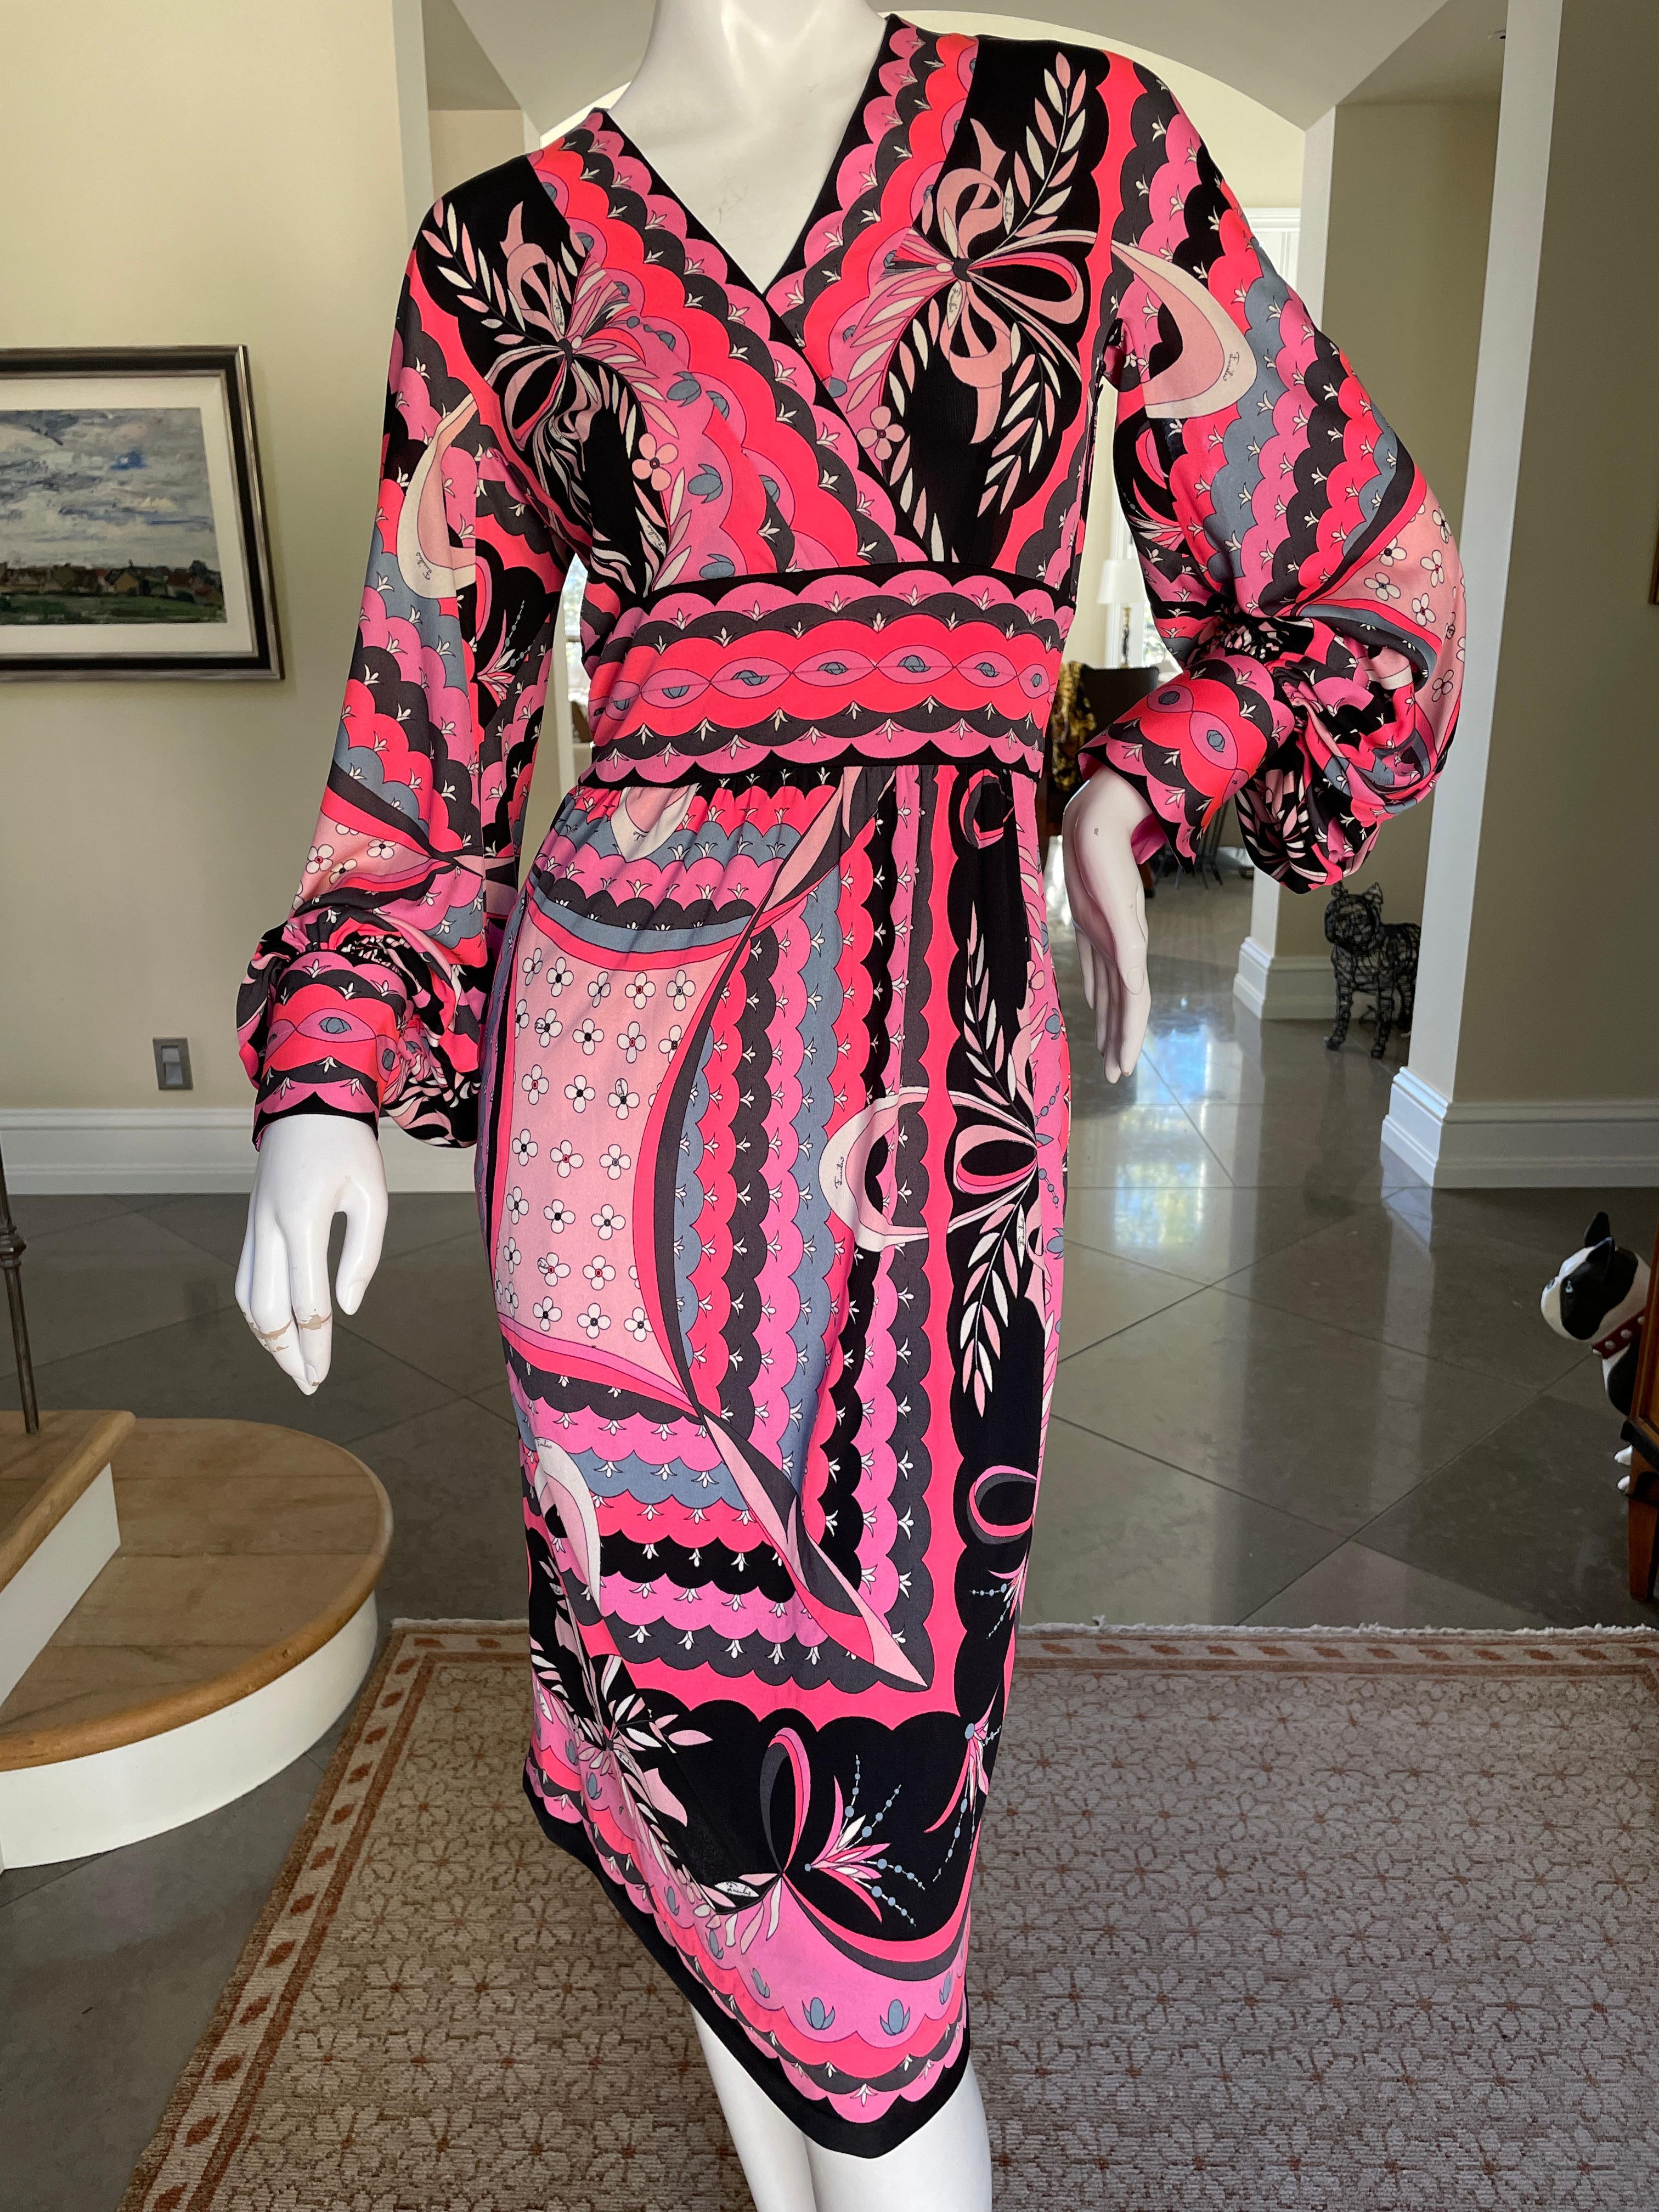 Pink Emilio Pucci Vintage 1960's Silk Jersey Dress from Saks Fifth Avenue